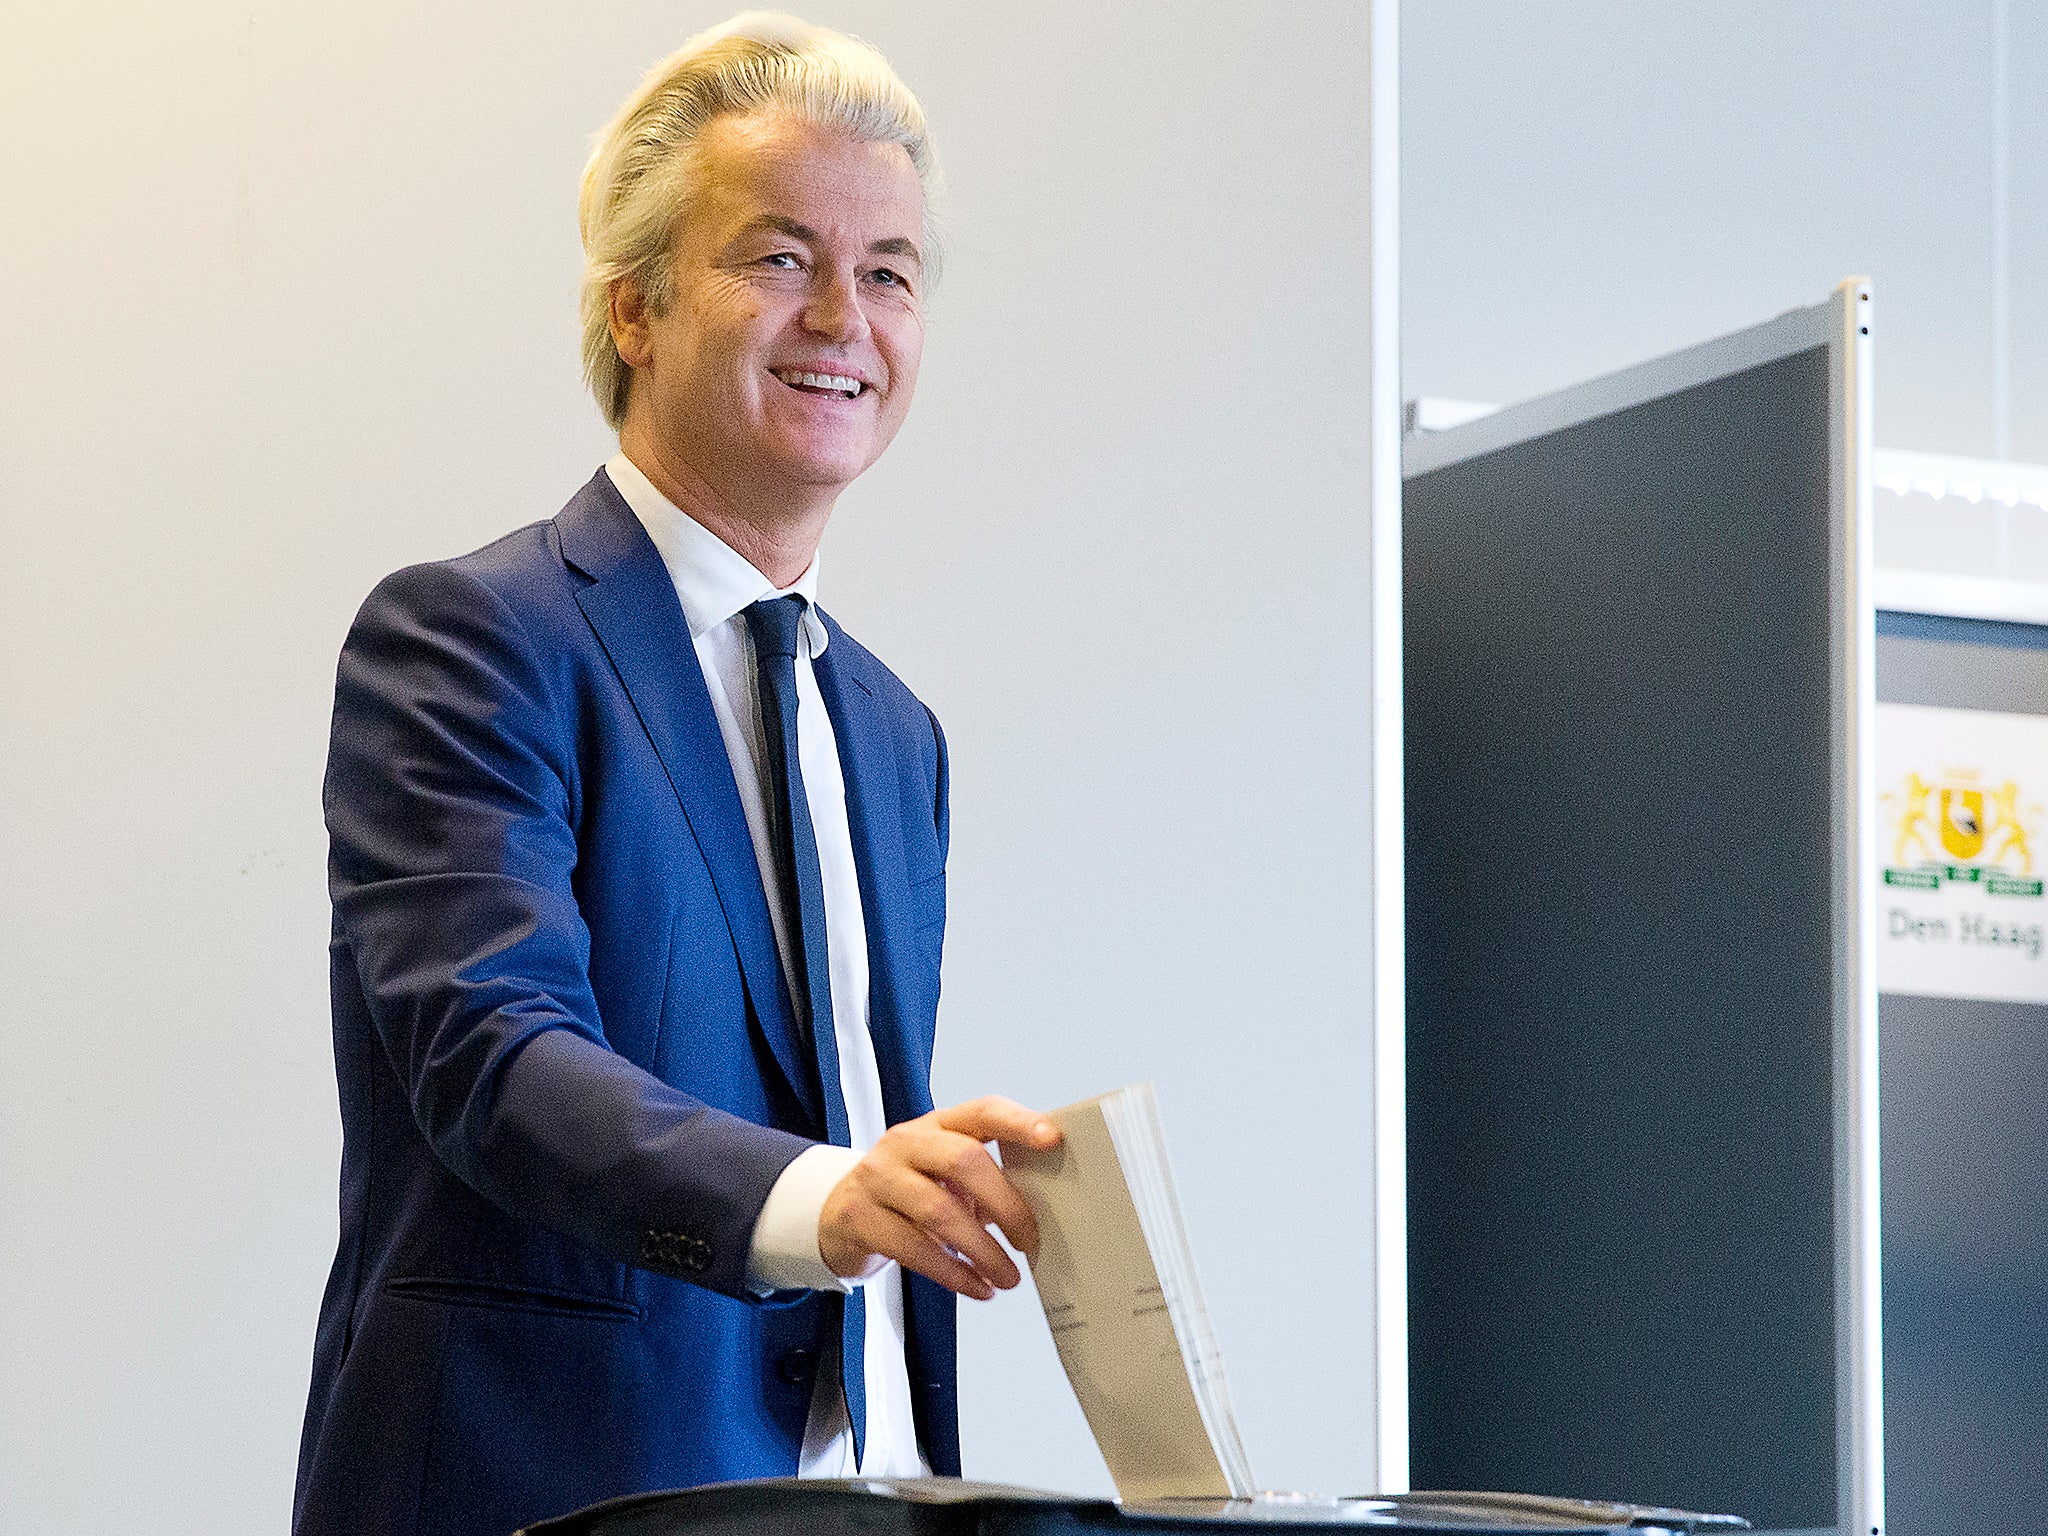 PVV party leader and firebrand anti-Islam lawmaker Geert Wilders casts his ballot for Dutch general elections in The Hague, Netherlands